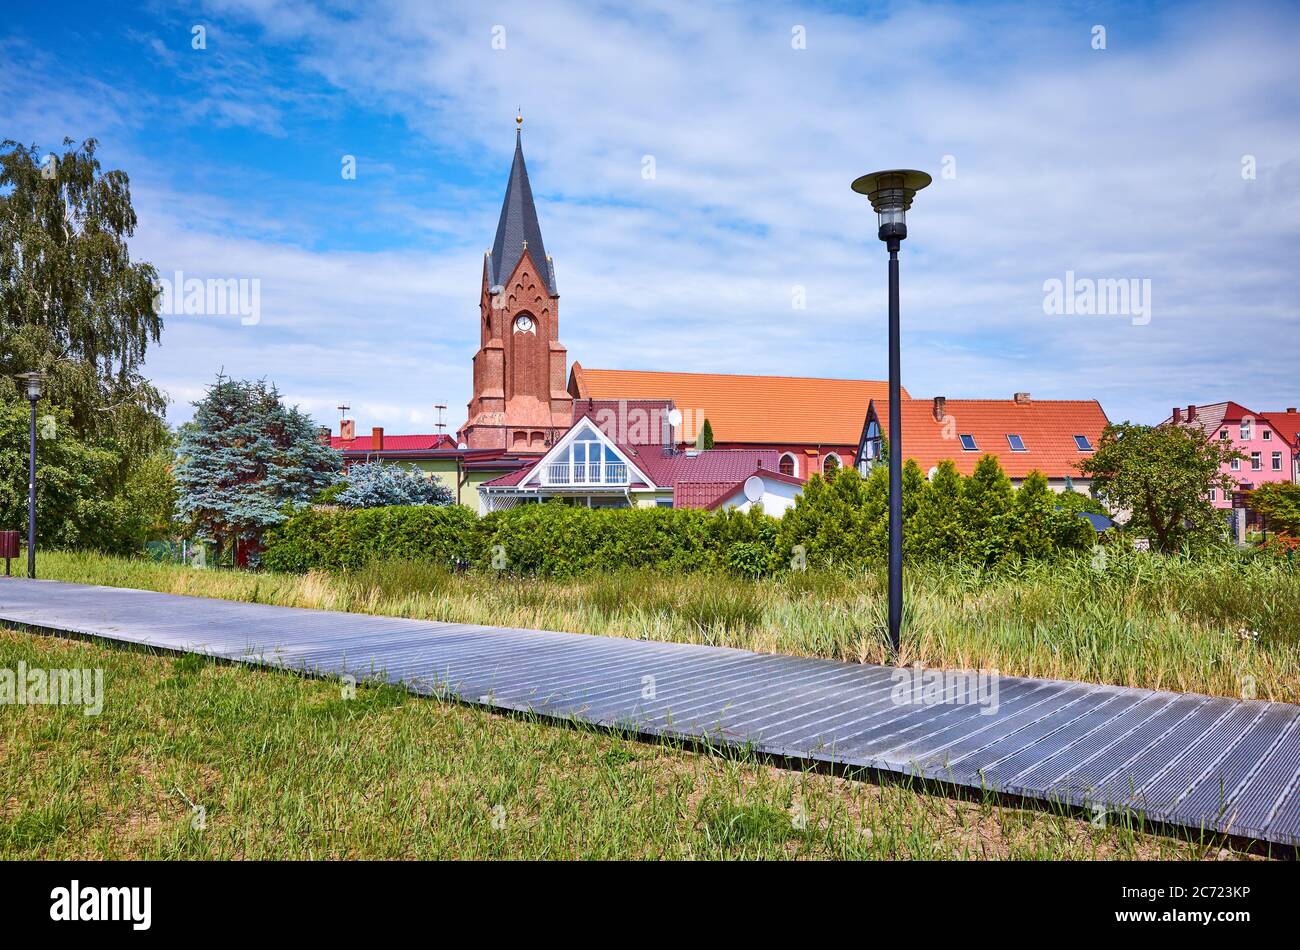 Promenade in Nowe Warpno with church tower in background, Poland. Stock Photo